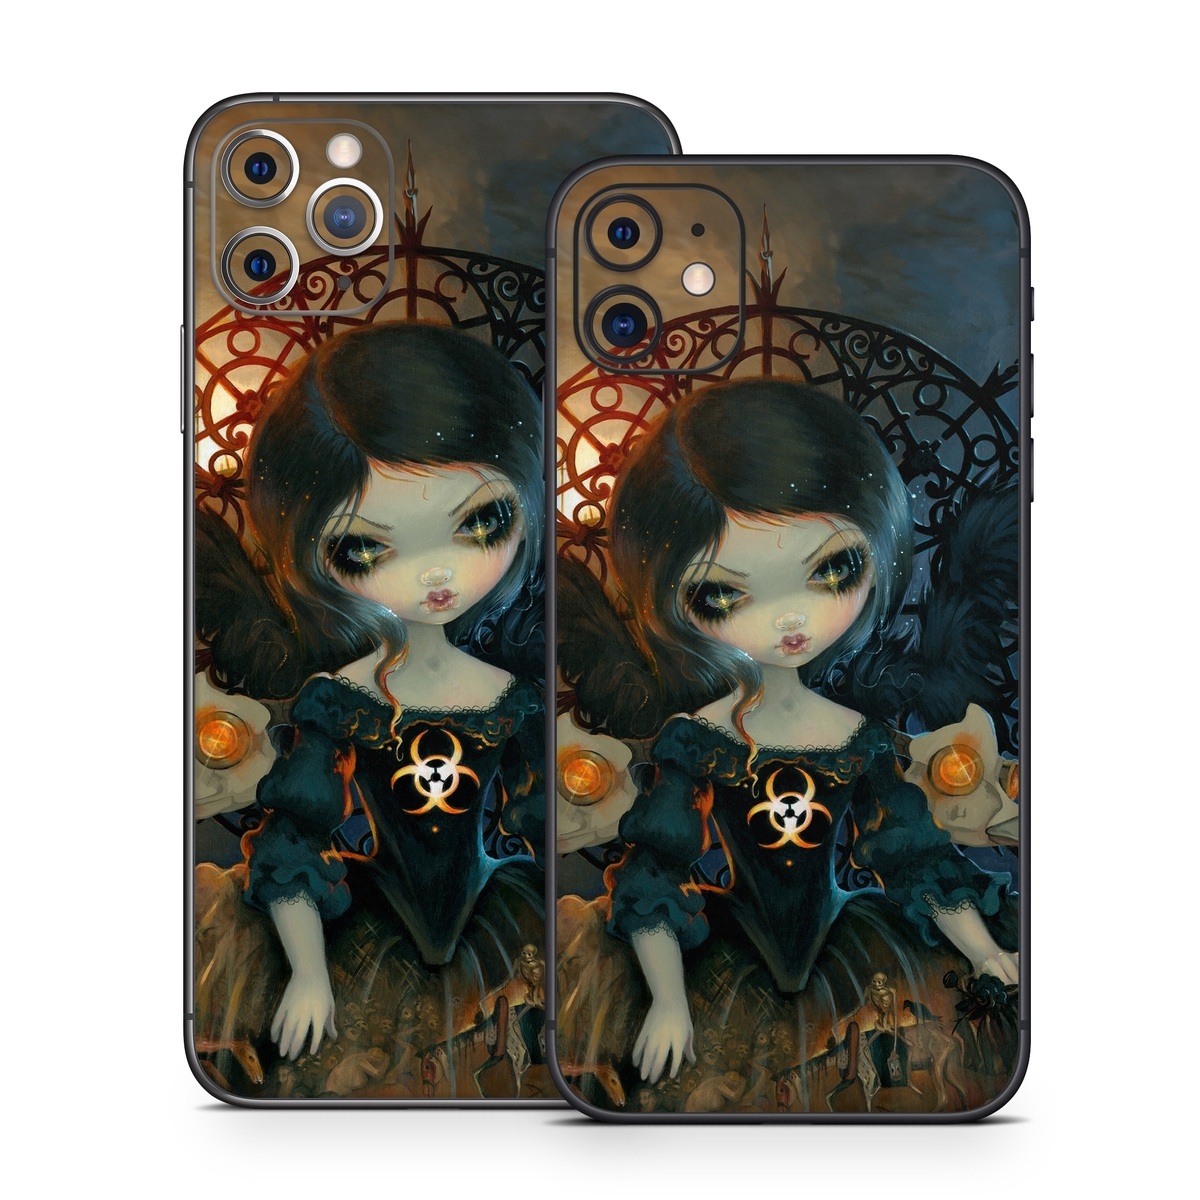 iPhone 11 Series Skin design of Doll, Head, Illustration, Eye, Cg artwork, Fictional character, Toy, Iris, Art, Mythology, with brown, red, black, orange, blue, yellow colors